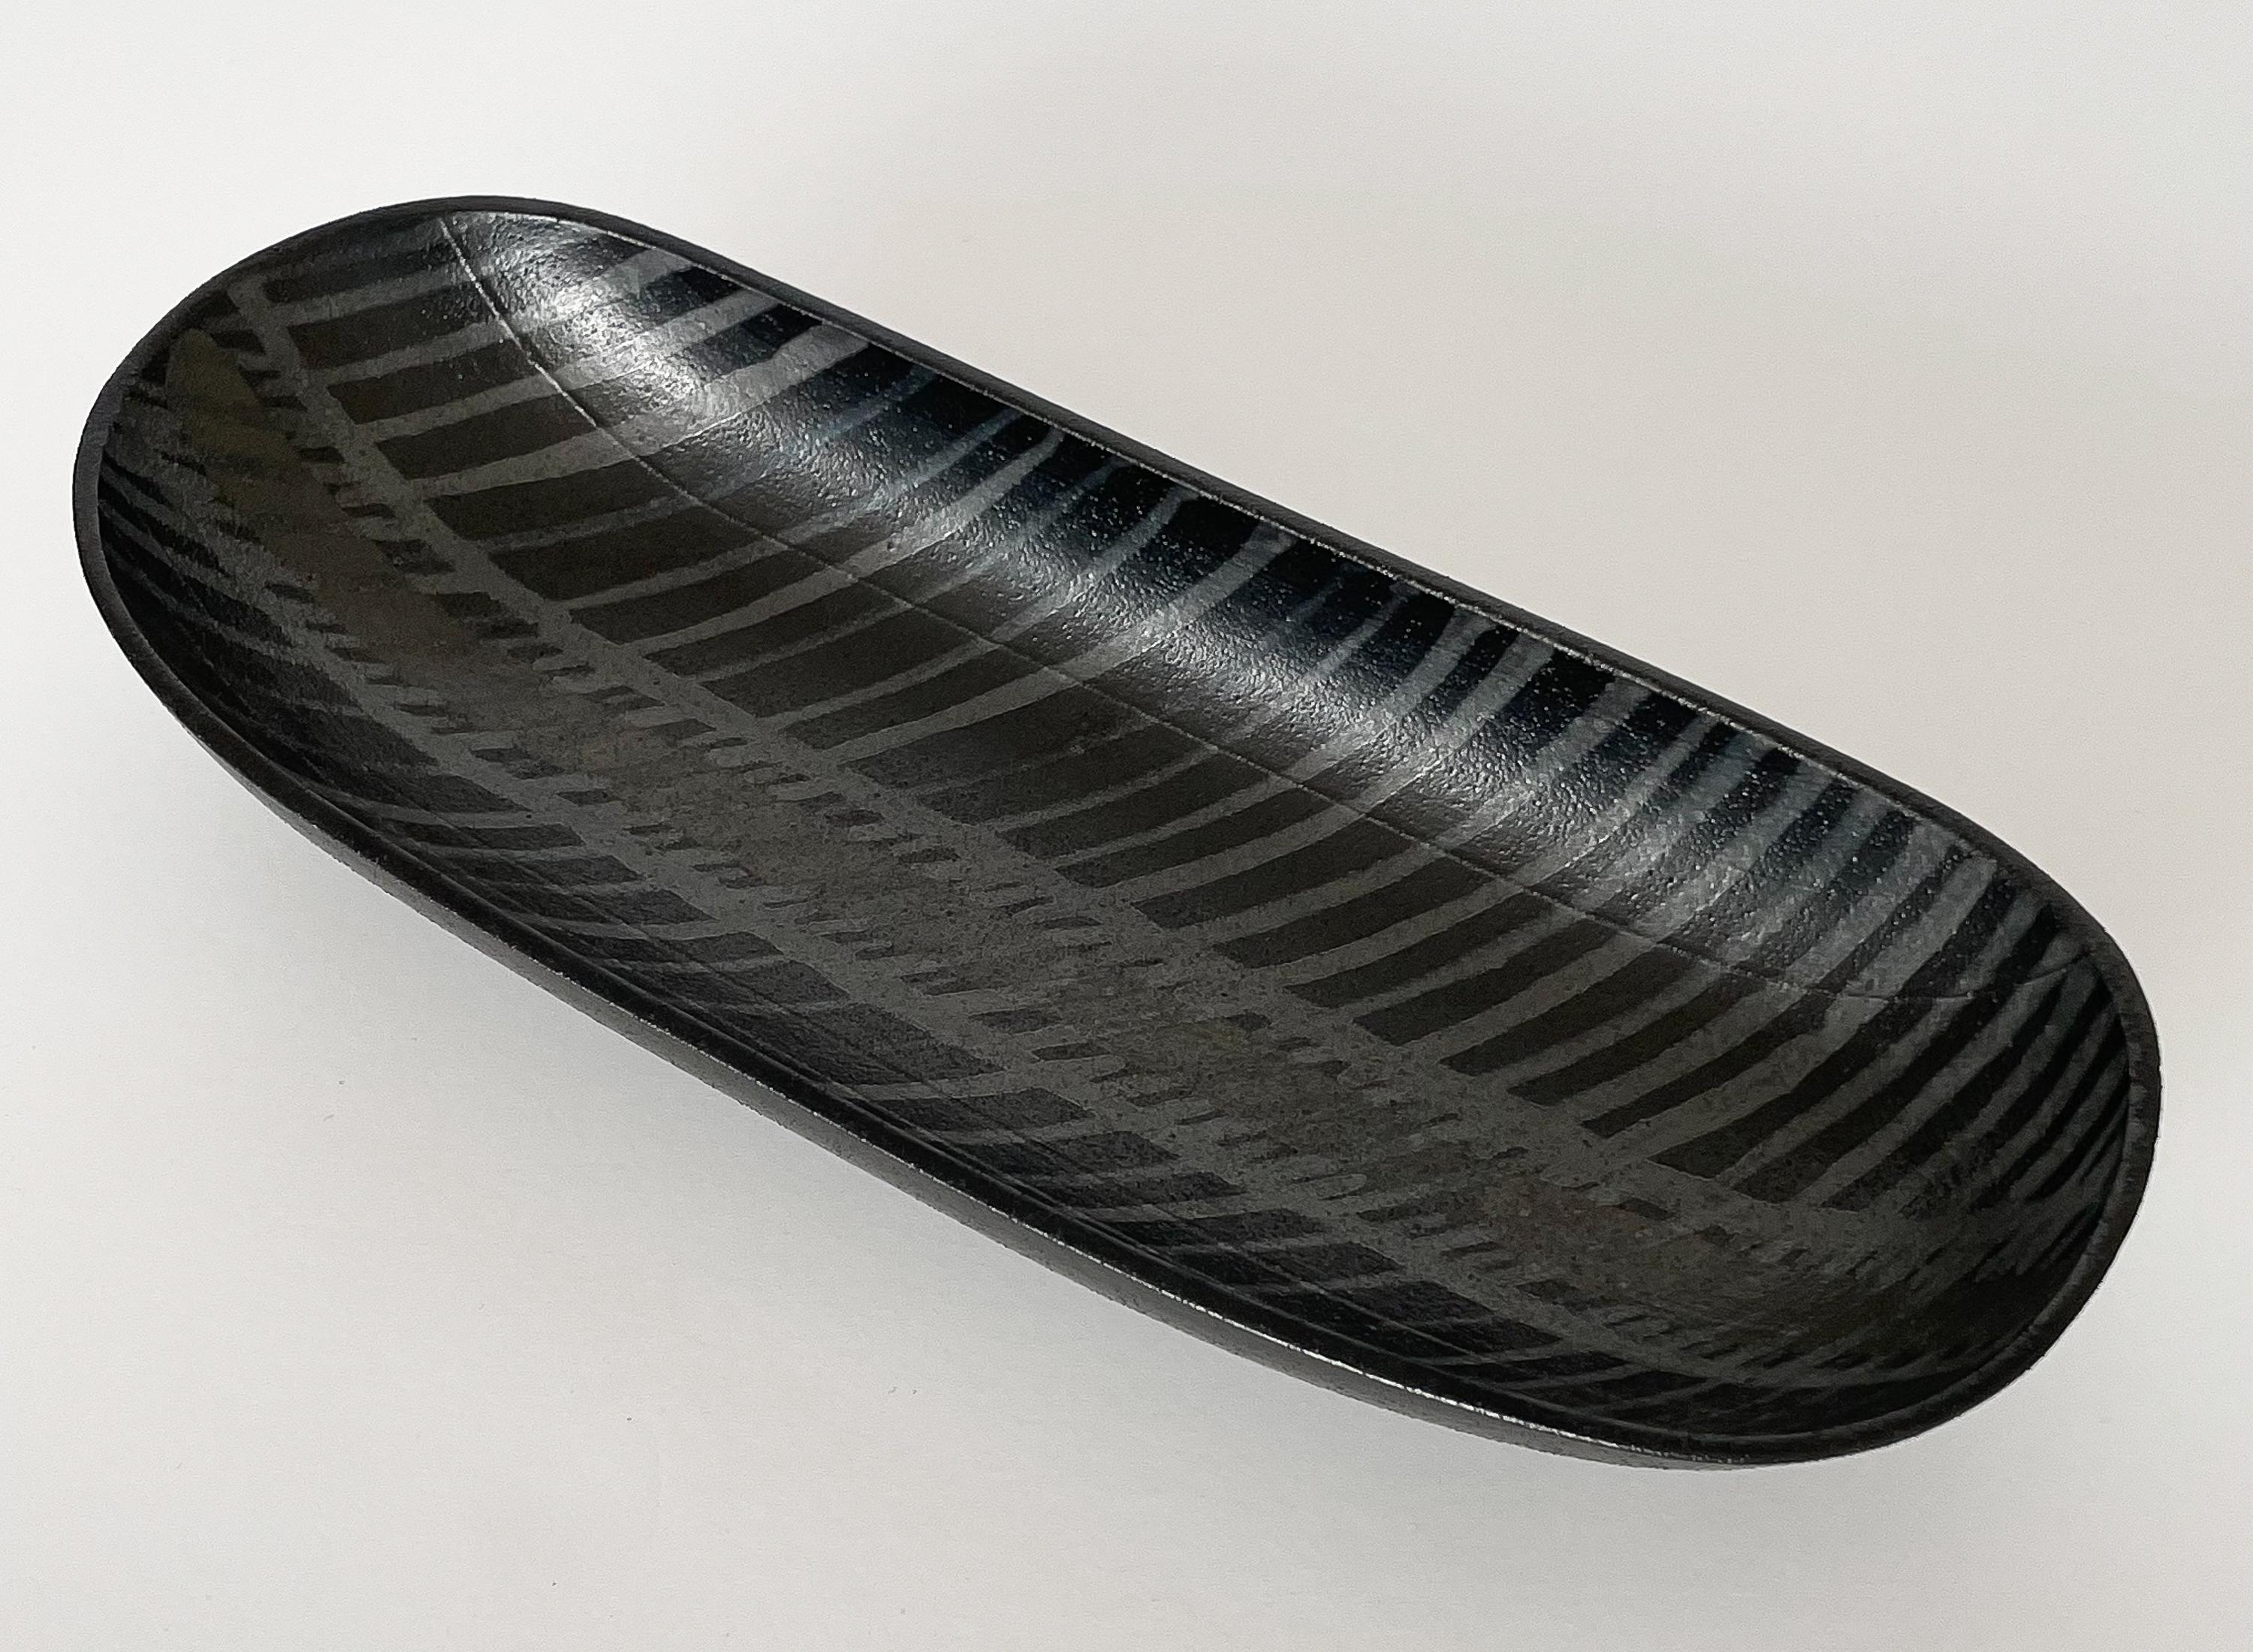 An uncommon black and gray centerpiece low bowl by Alessio Tasca, Italy circa 1970s. This modern black ceramic elongated bowl features an abstract striped design within the interior in gray and bronze colors. Stamped and retains the original paper